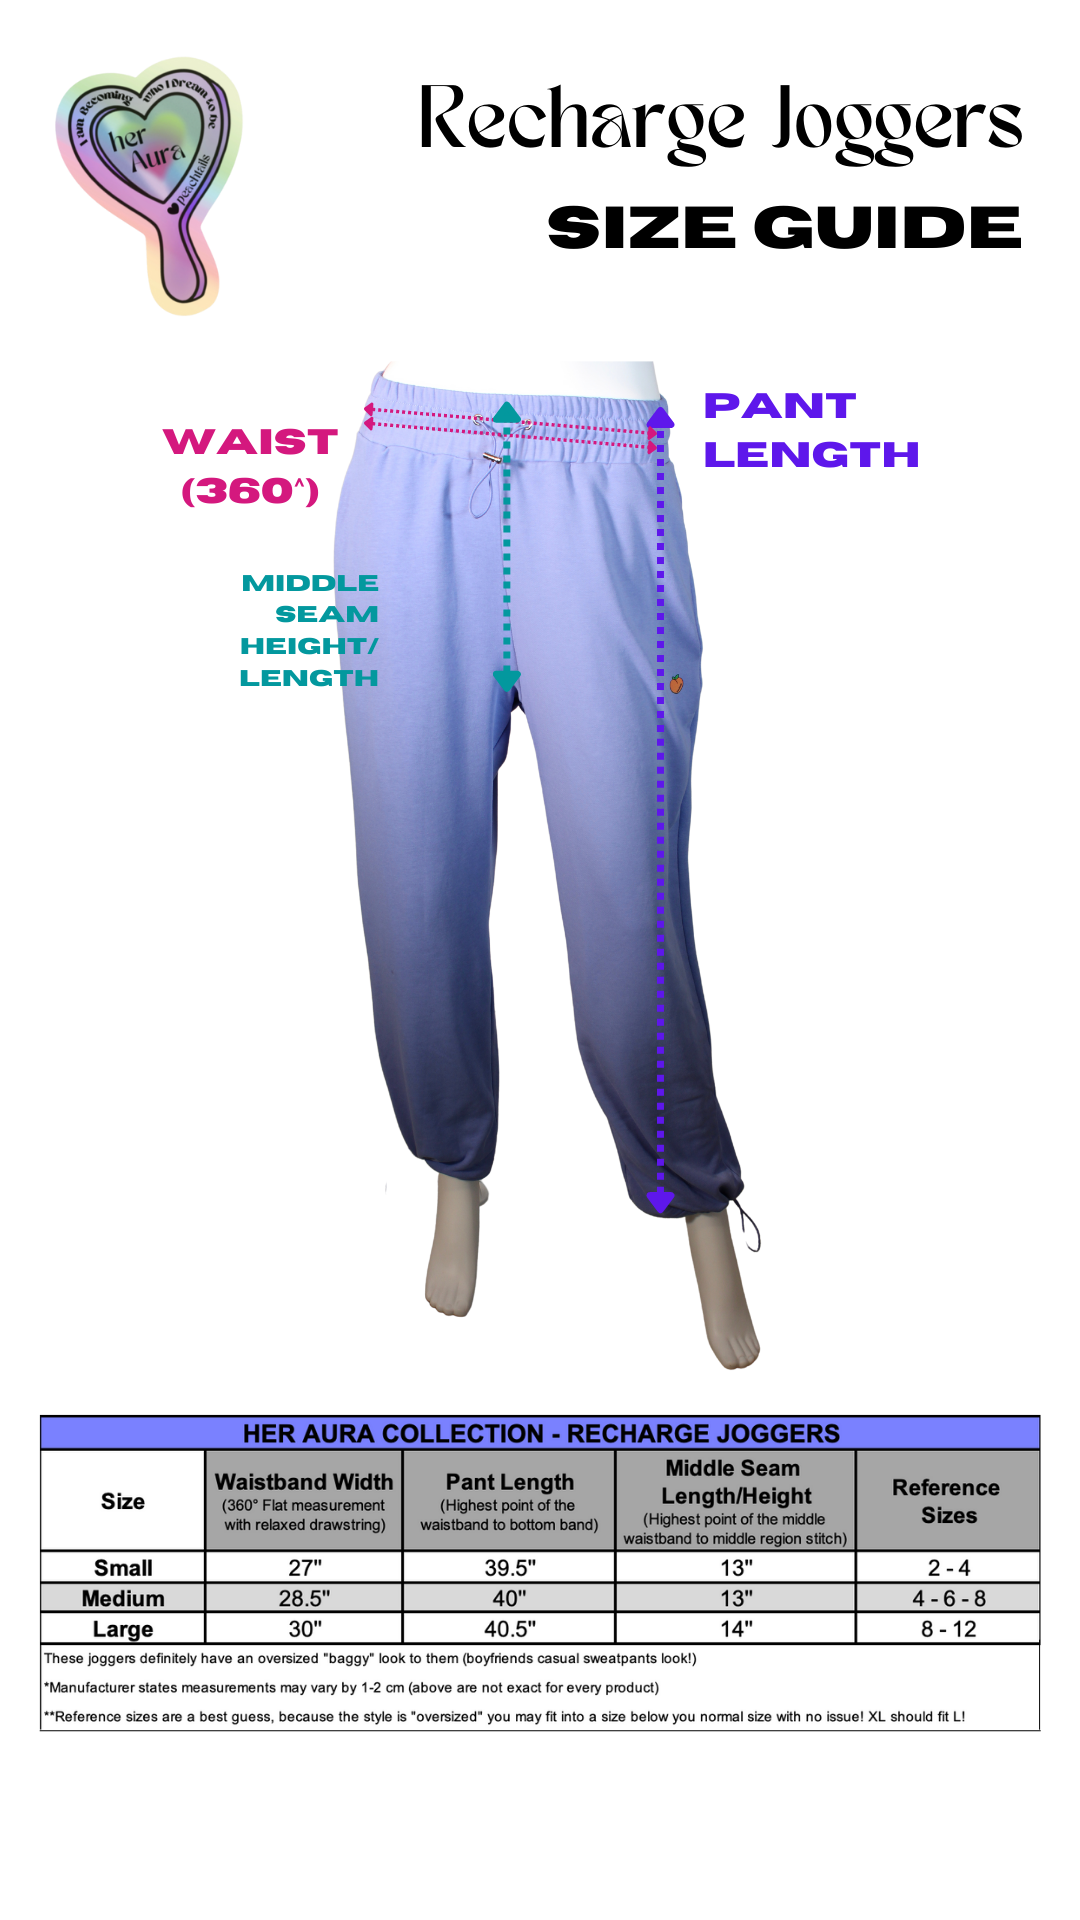 The image is a size guide for "Recharge Joggers" from the Her Aura Collection. It shows a mannequin wearing lavender joggers with dotted lines indicating how to measure the waist (360°), pant length, and middle seam height. Sizes range from small to large with measurements for waistband width (27.5" to 30"), pant length (39.5" to 40.5"), and middle seam height (13"). Reference sizes are listed alongside, suggesting an oversized fit and a recommendation to size down.